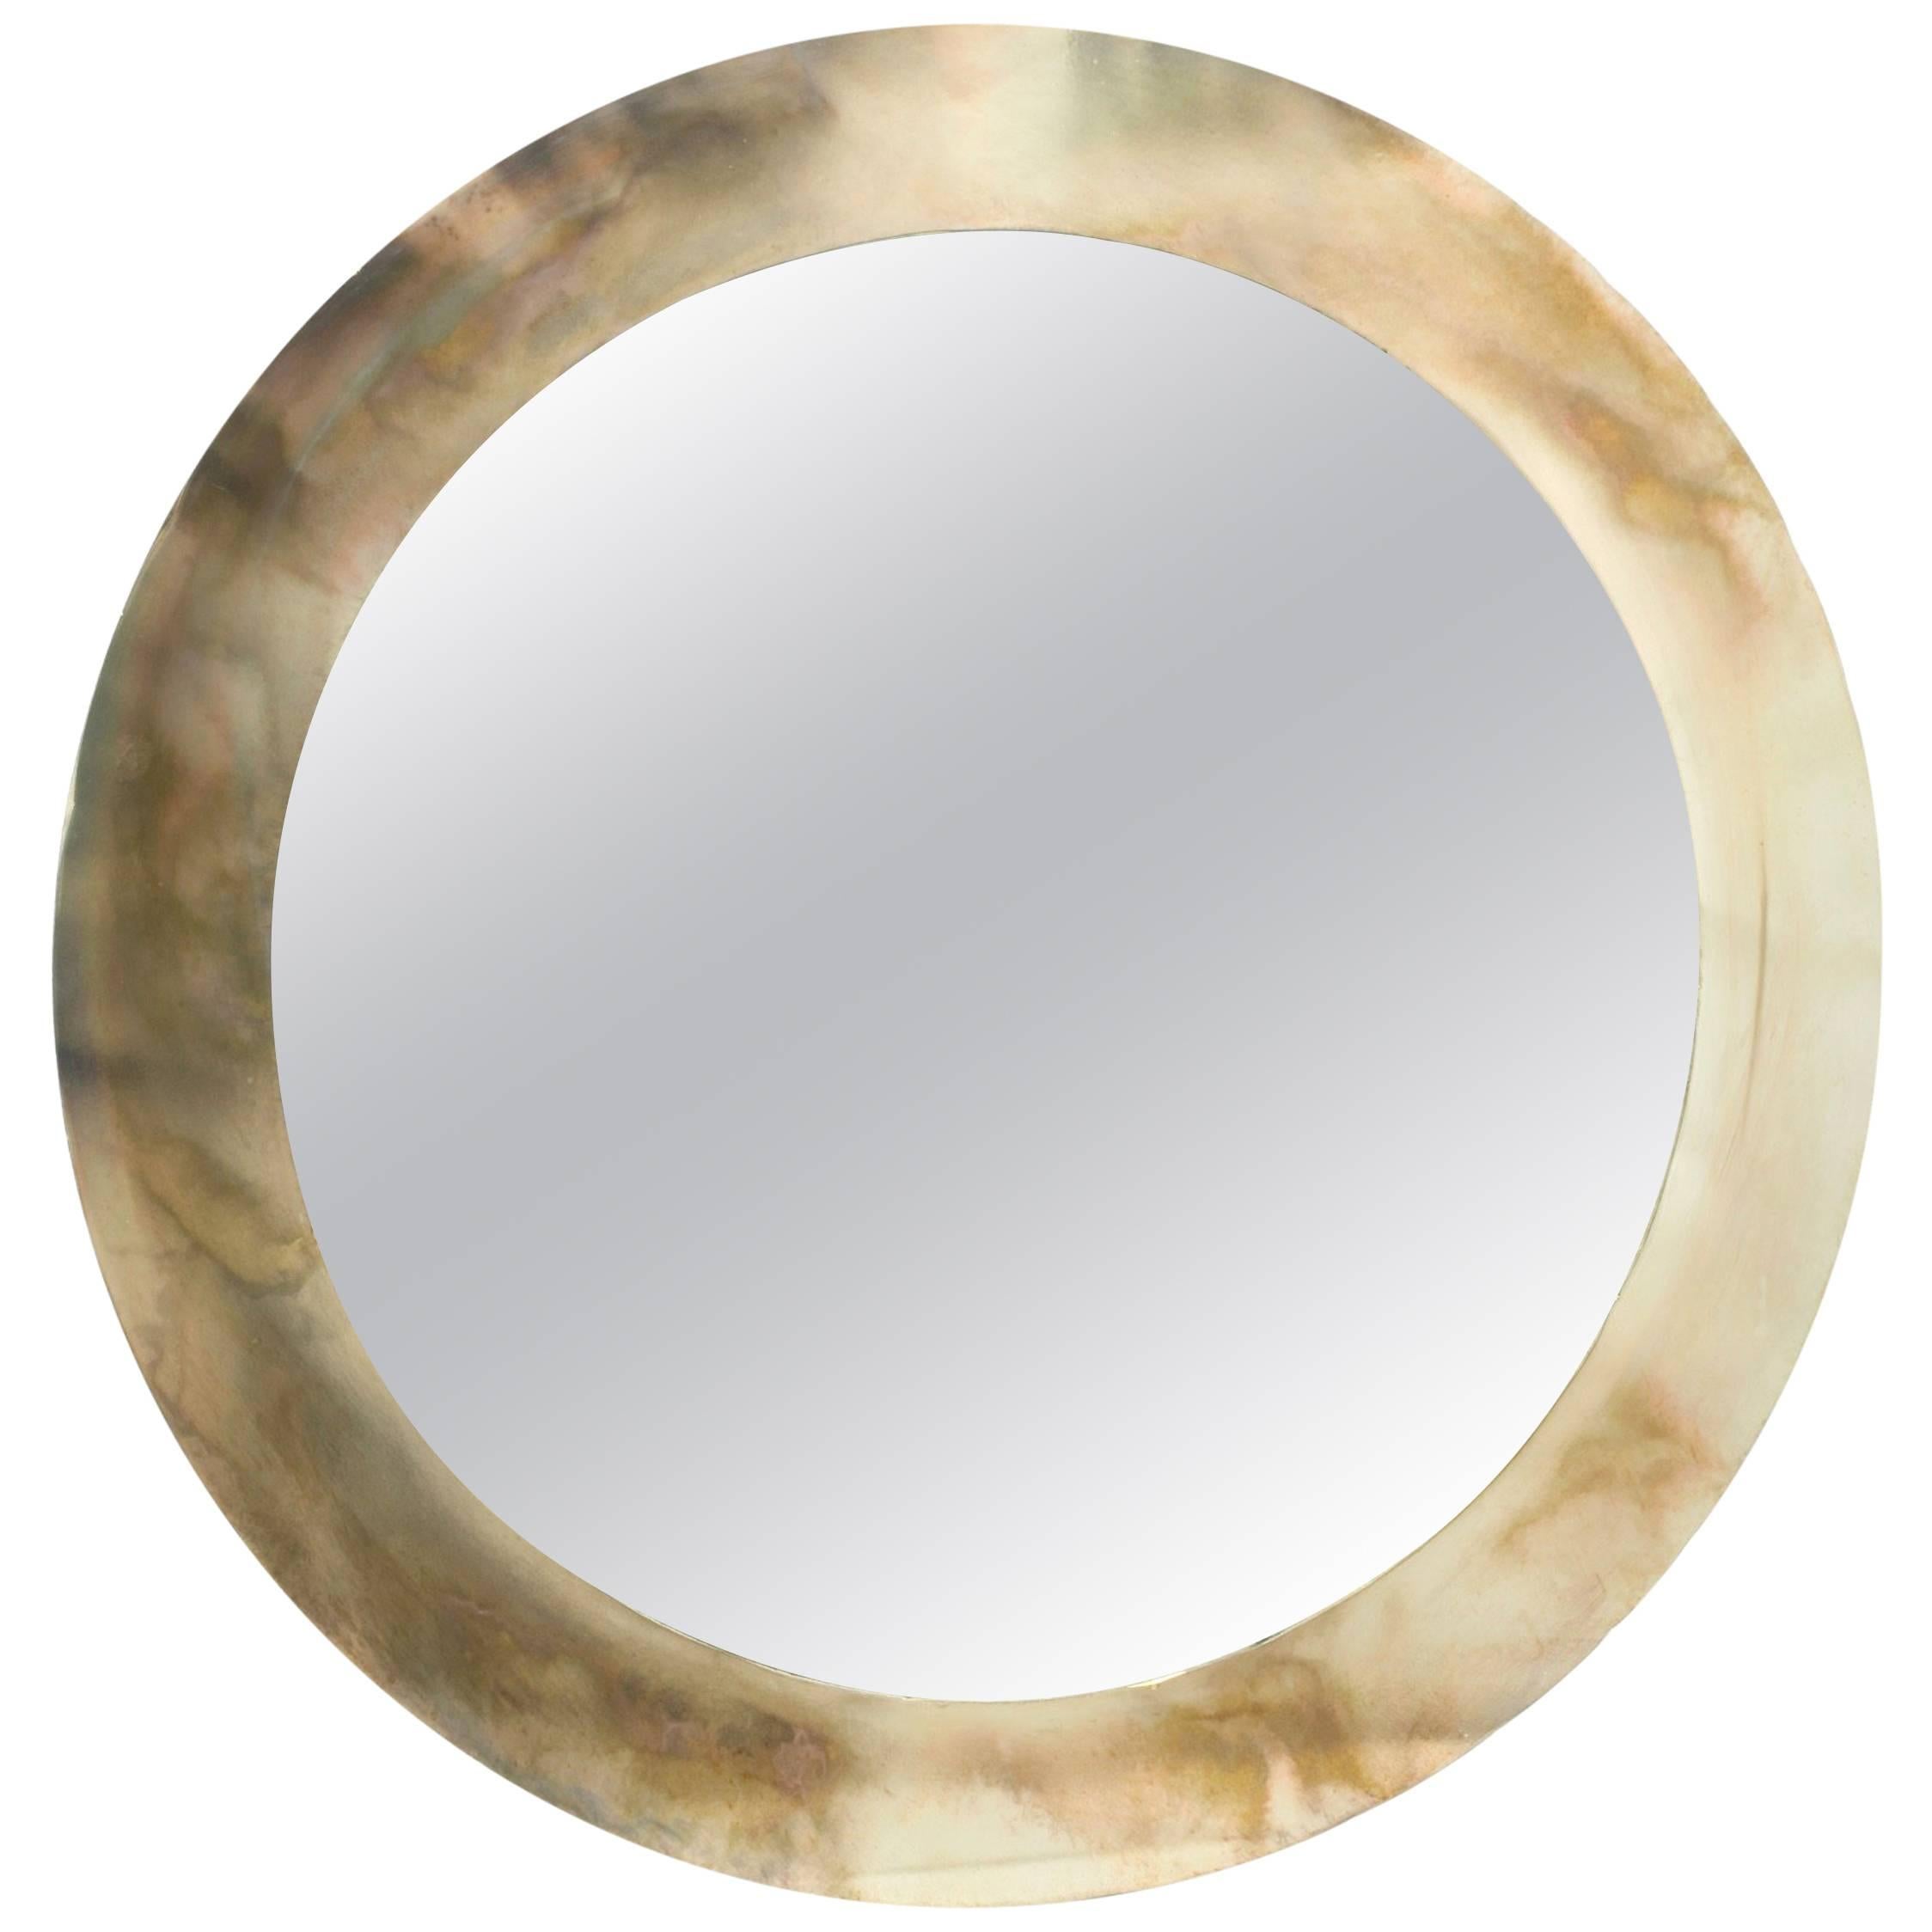 Hand-silvered Round Mirror with Gold, Silver, Iron and Copper